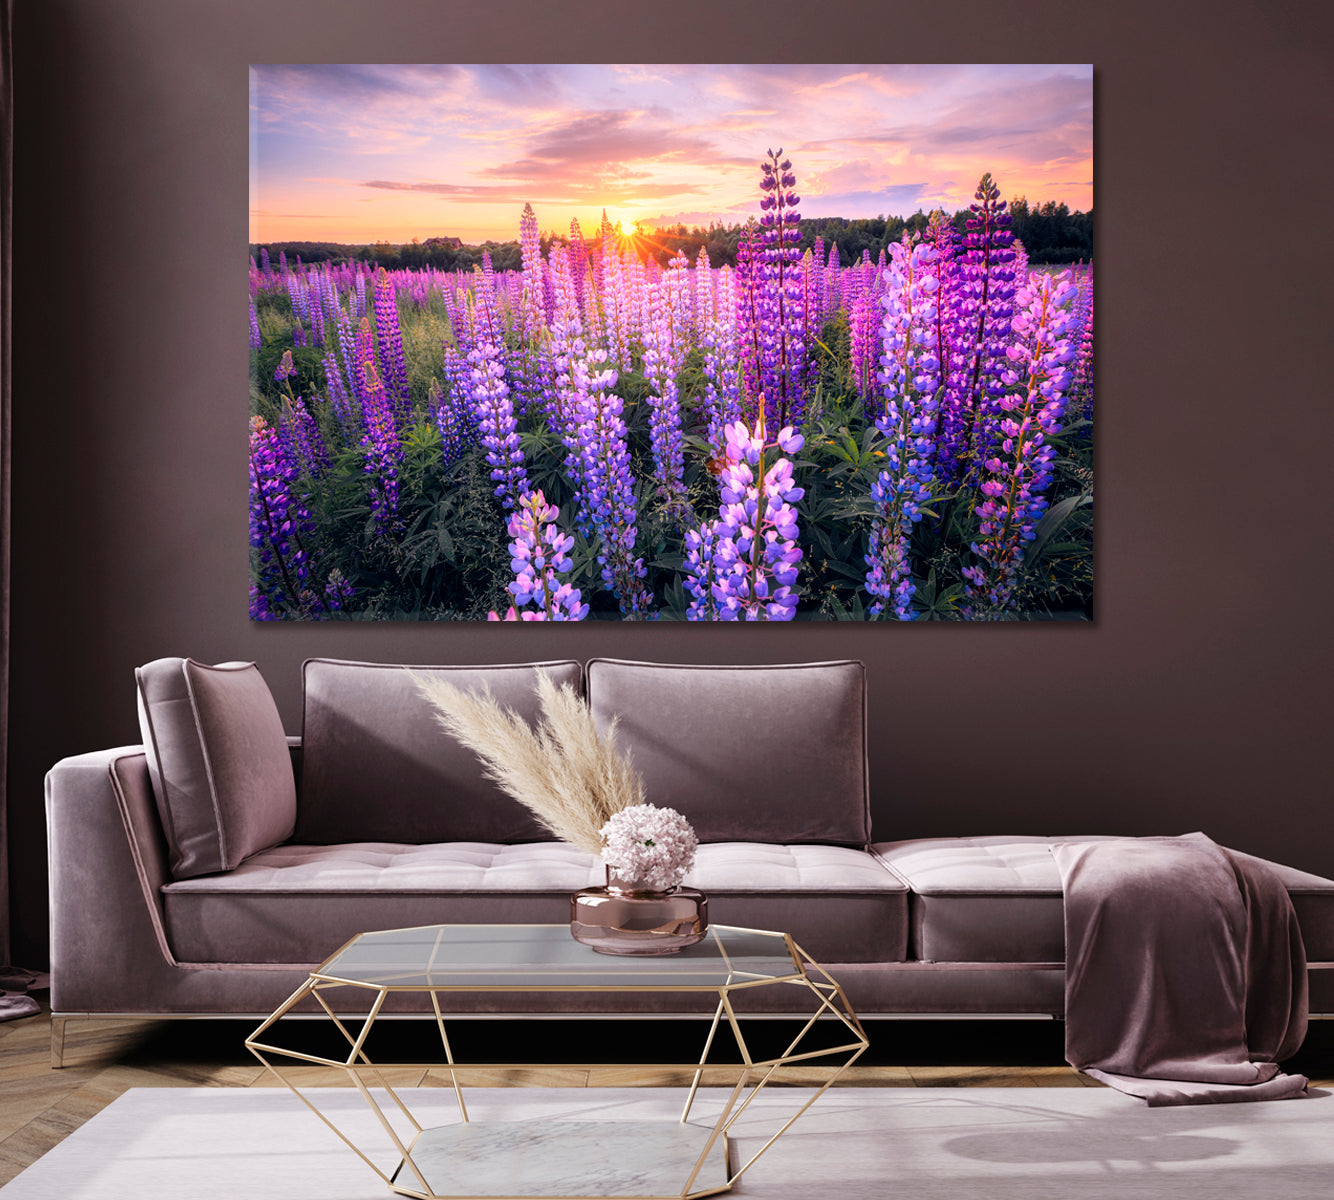 Summer Sunset over Field with Blooming Lupins Canvas Print-Canvas Print-CetArt-1 Panel-24x16 inches-CetArt